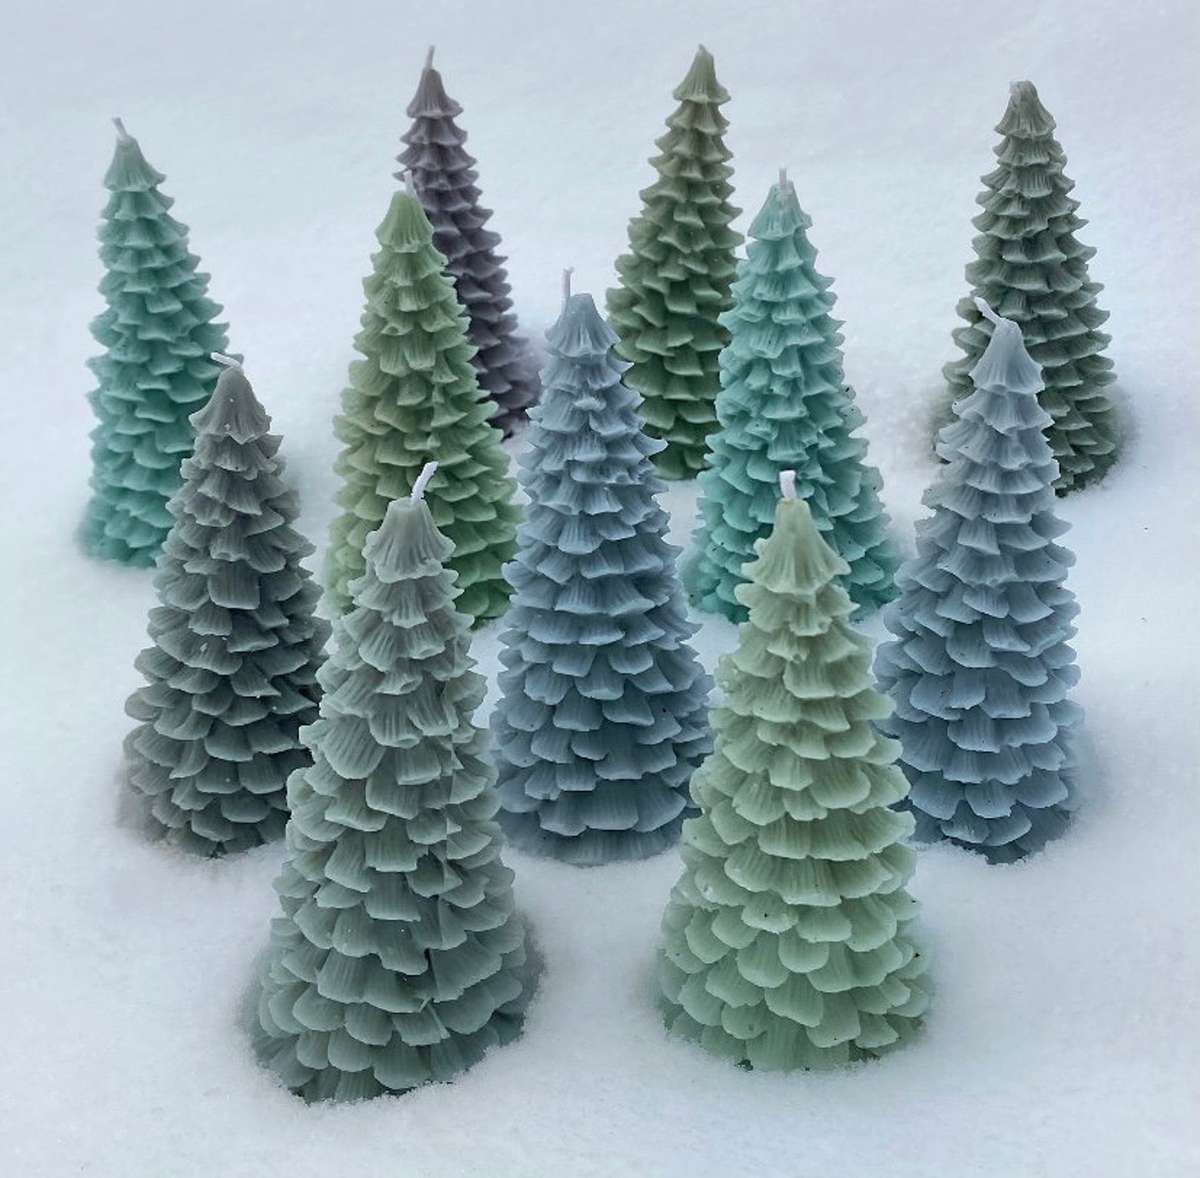 Hand-Poured Christmas Tree Candles